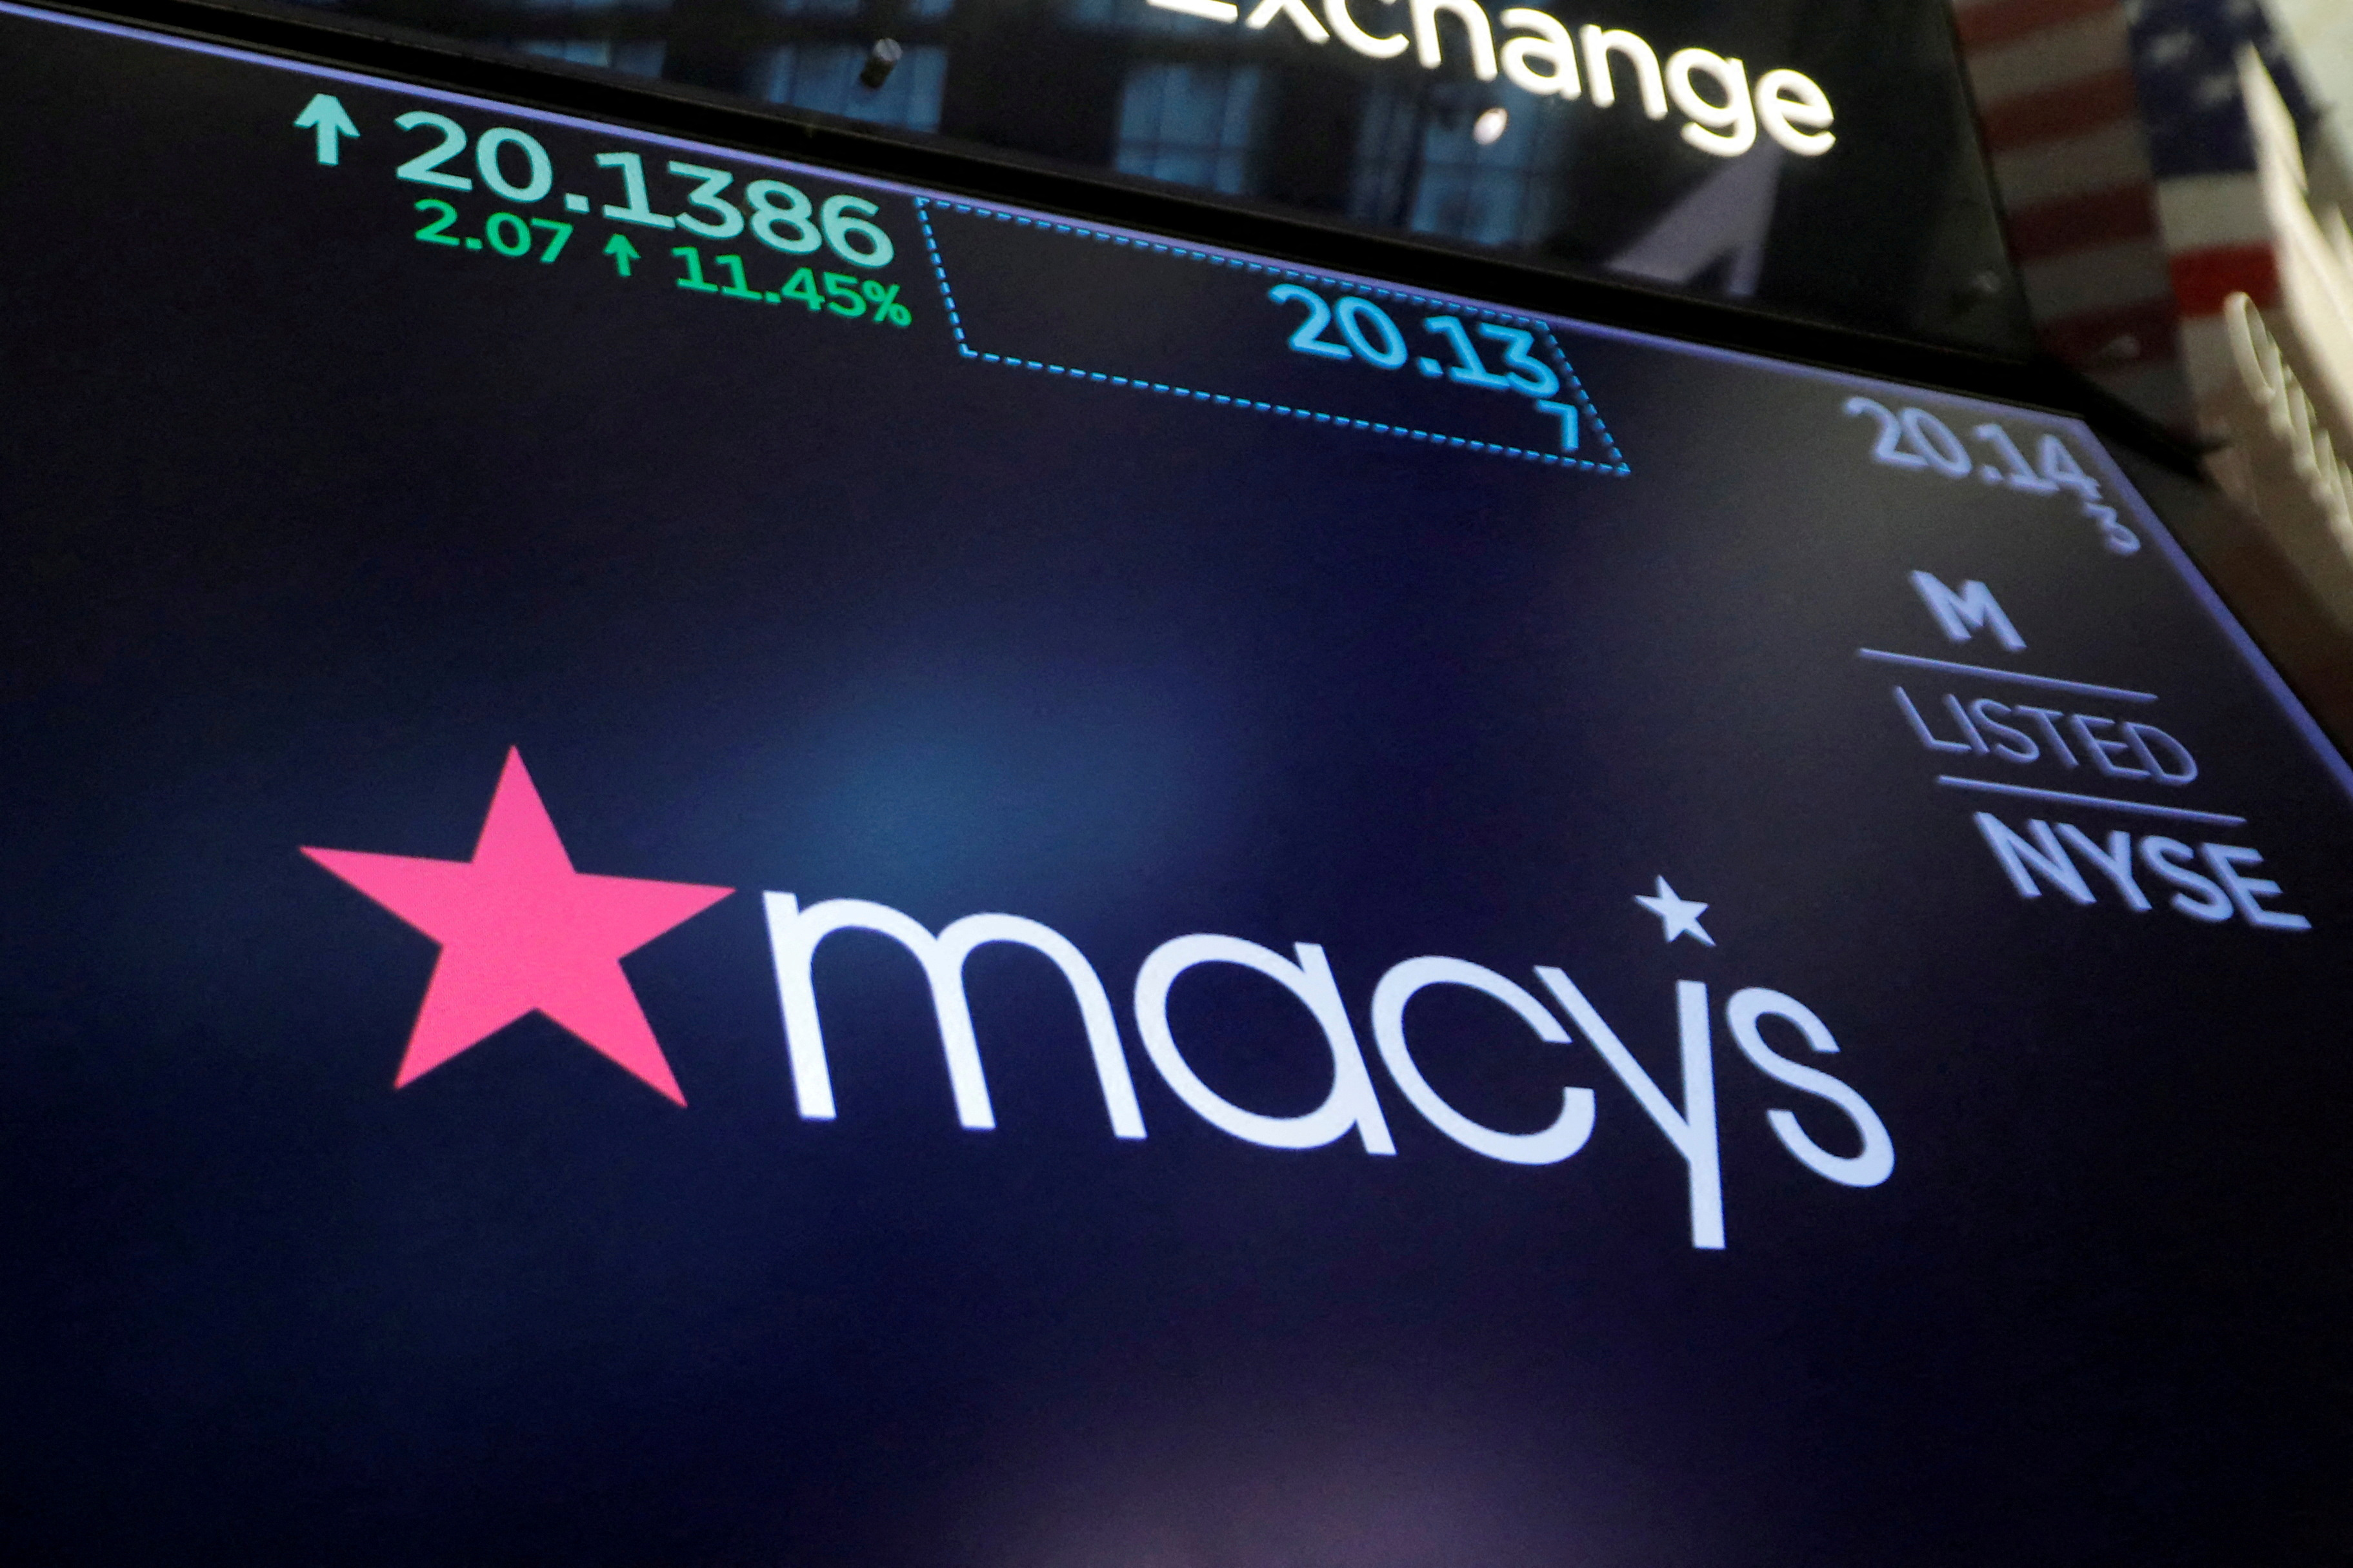 The Macy's logo is displayed on the trading floor at the New York Stock Exchange (NYSE) in Manhattan, New York City